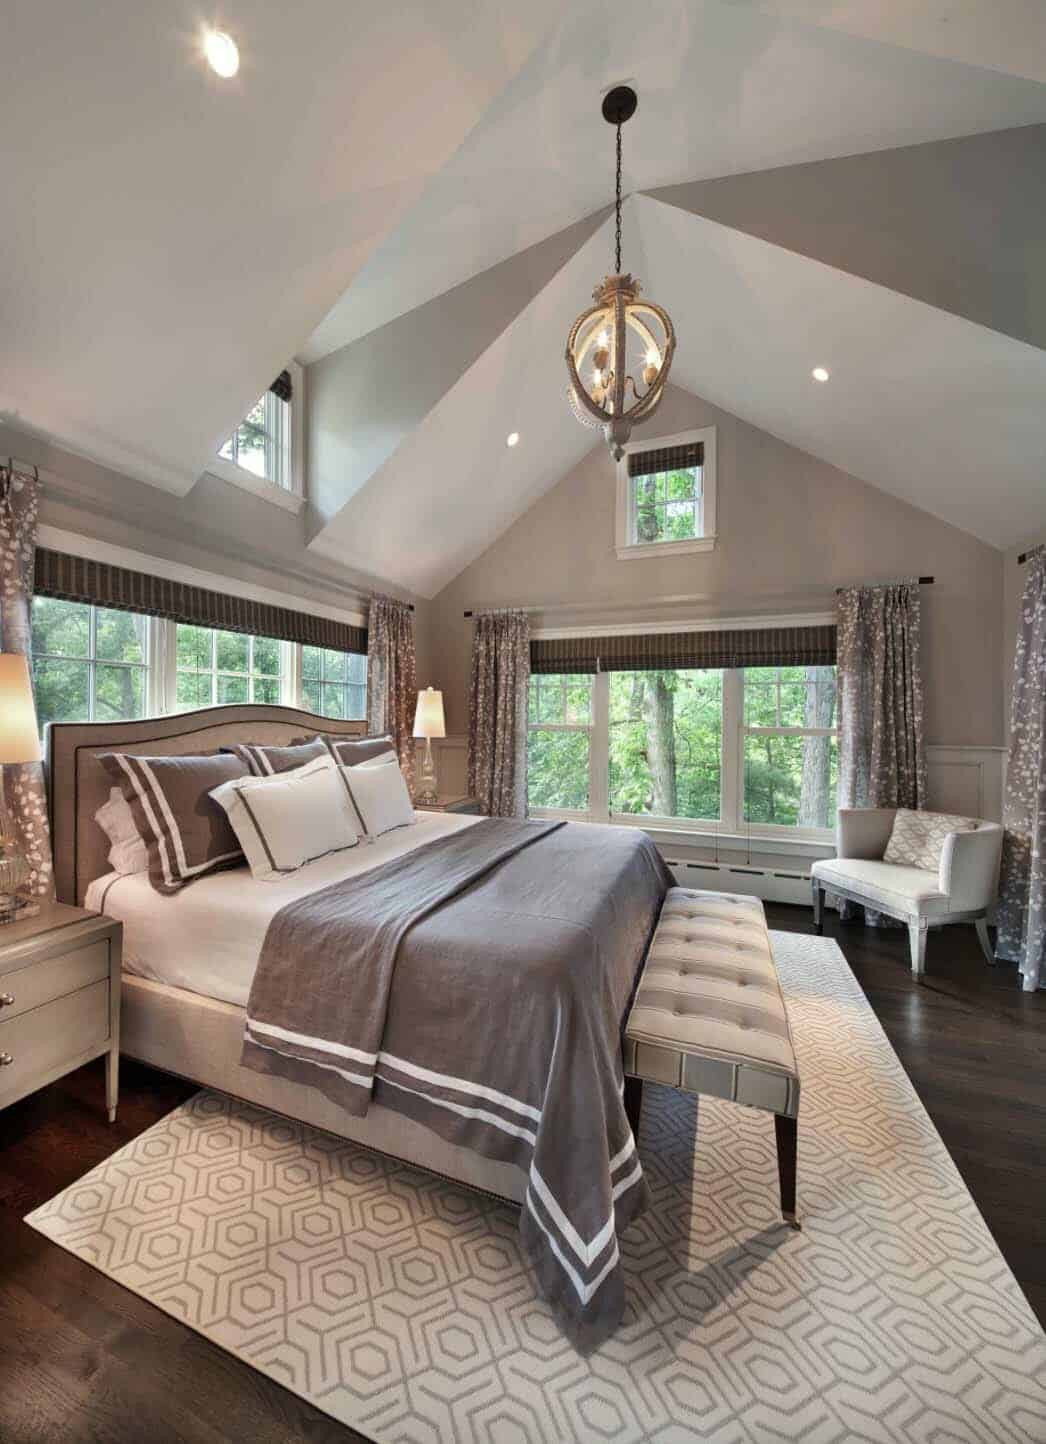 Master Bedroom Color Schemes
 25 Absolutely stunning master bedroom color scheme ideas